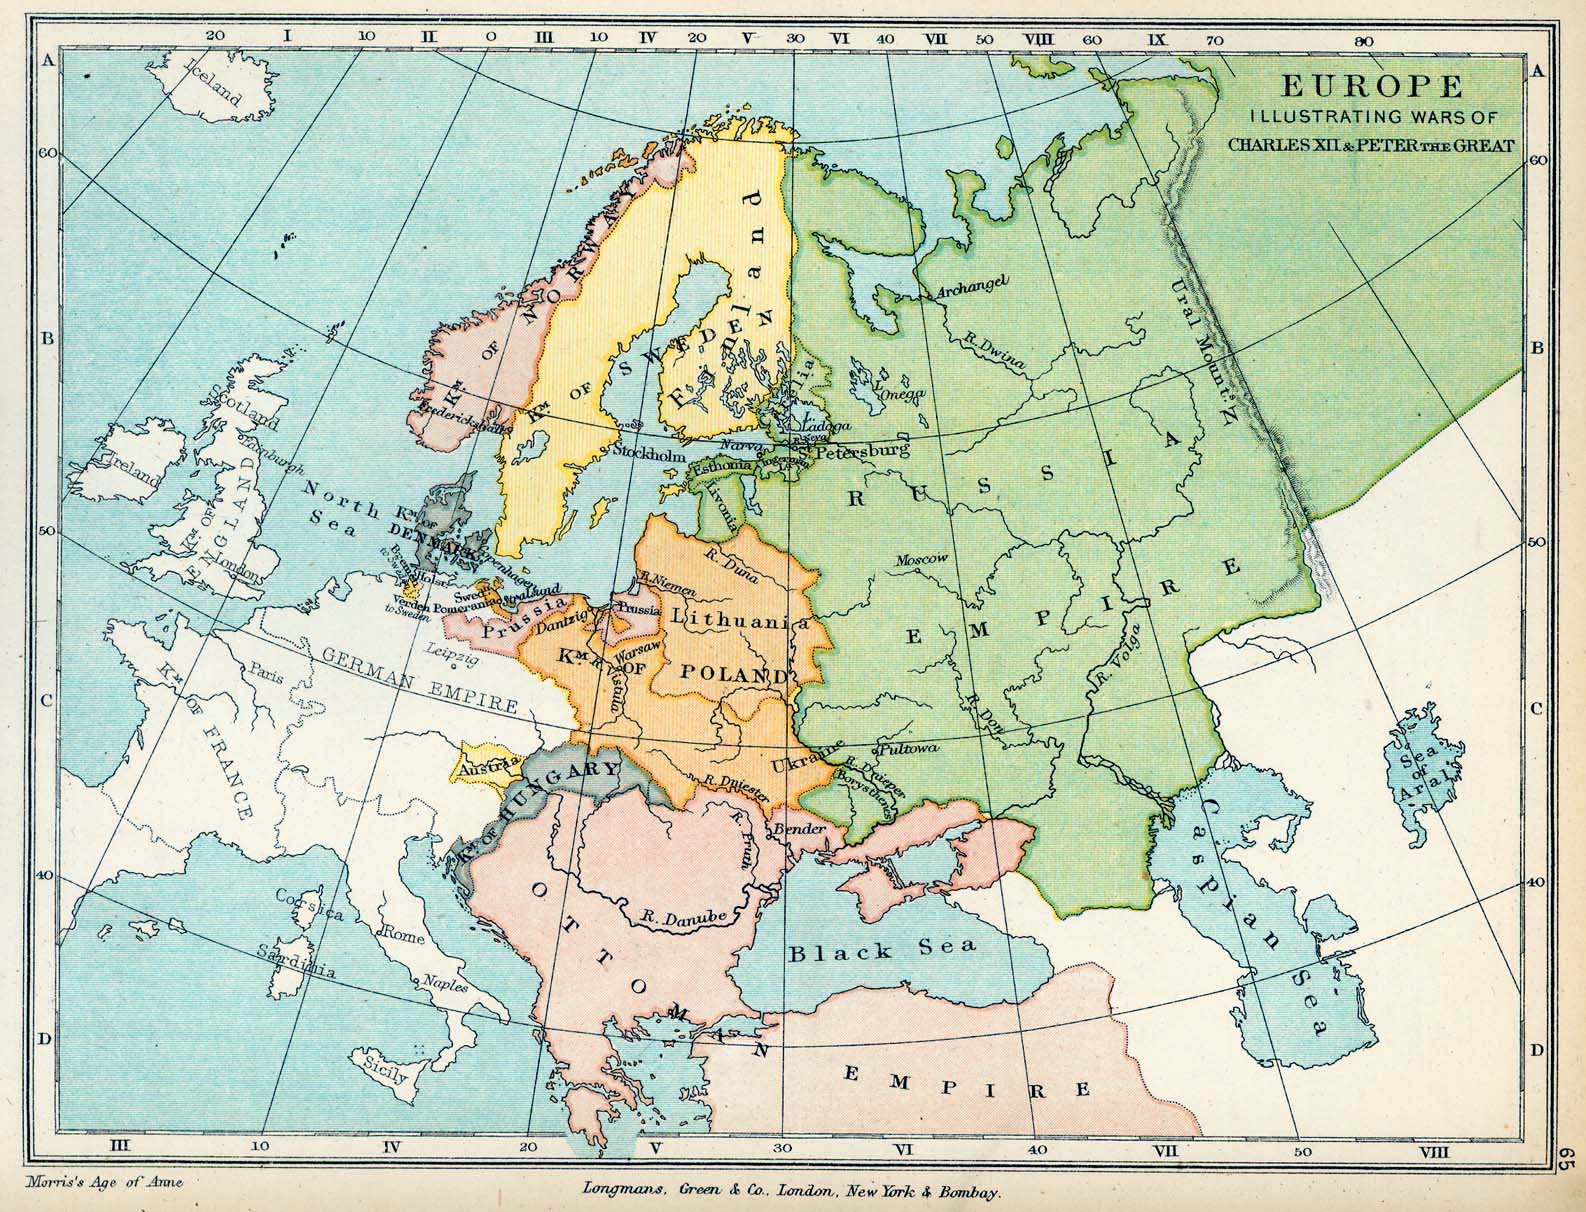 Map of Europe: The Wars of Charles XII and Peter the Great